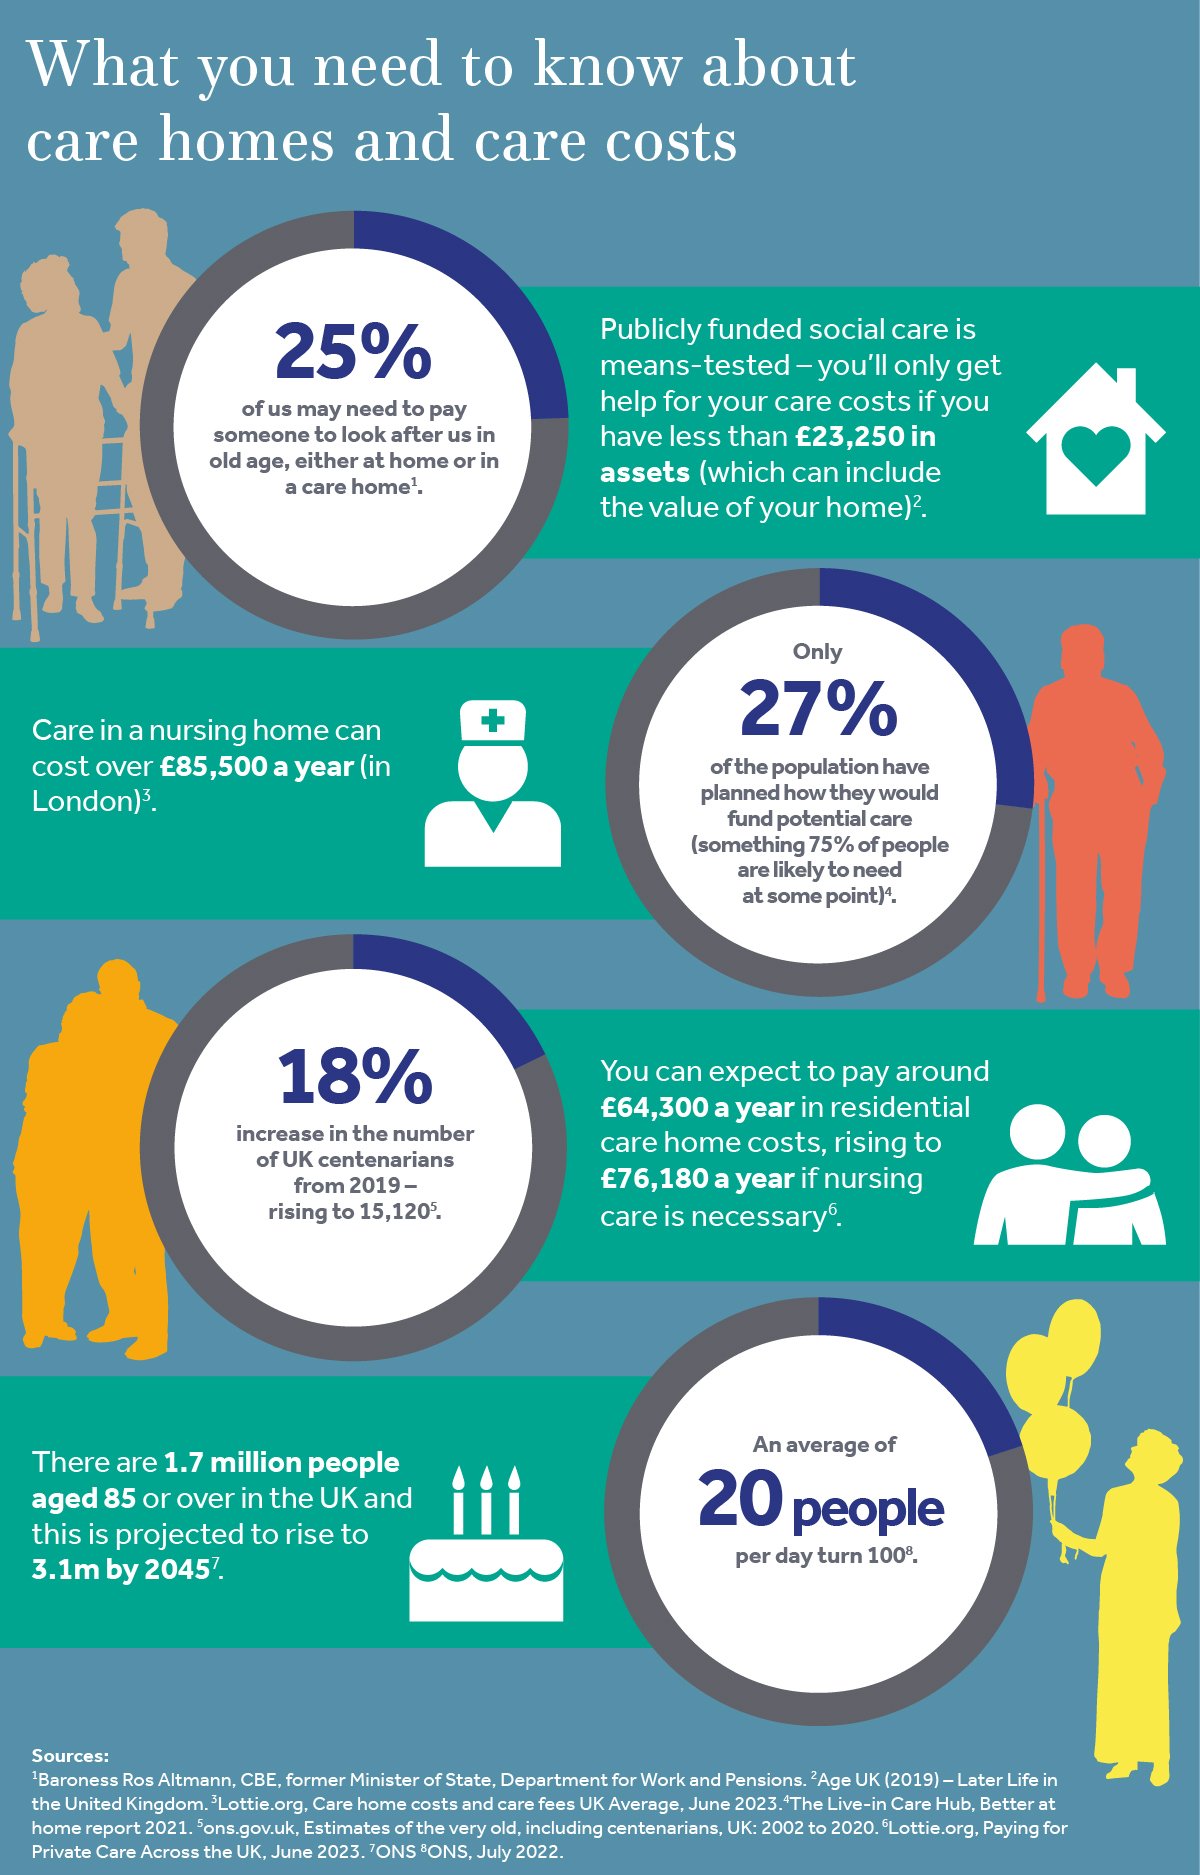 Care_at_Home_infographic_02.jpg